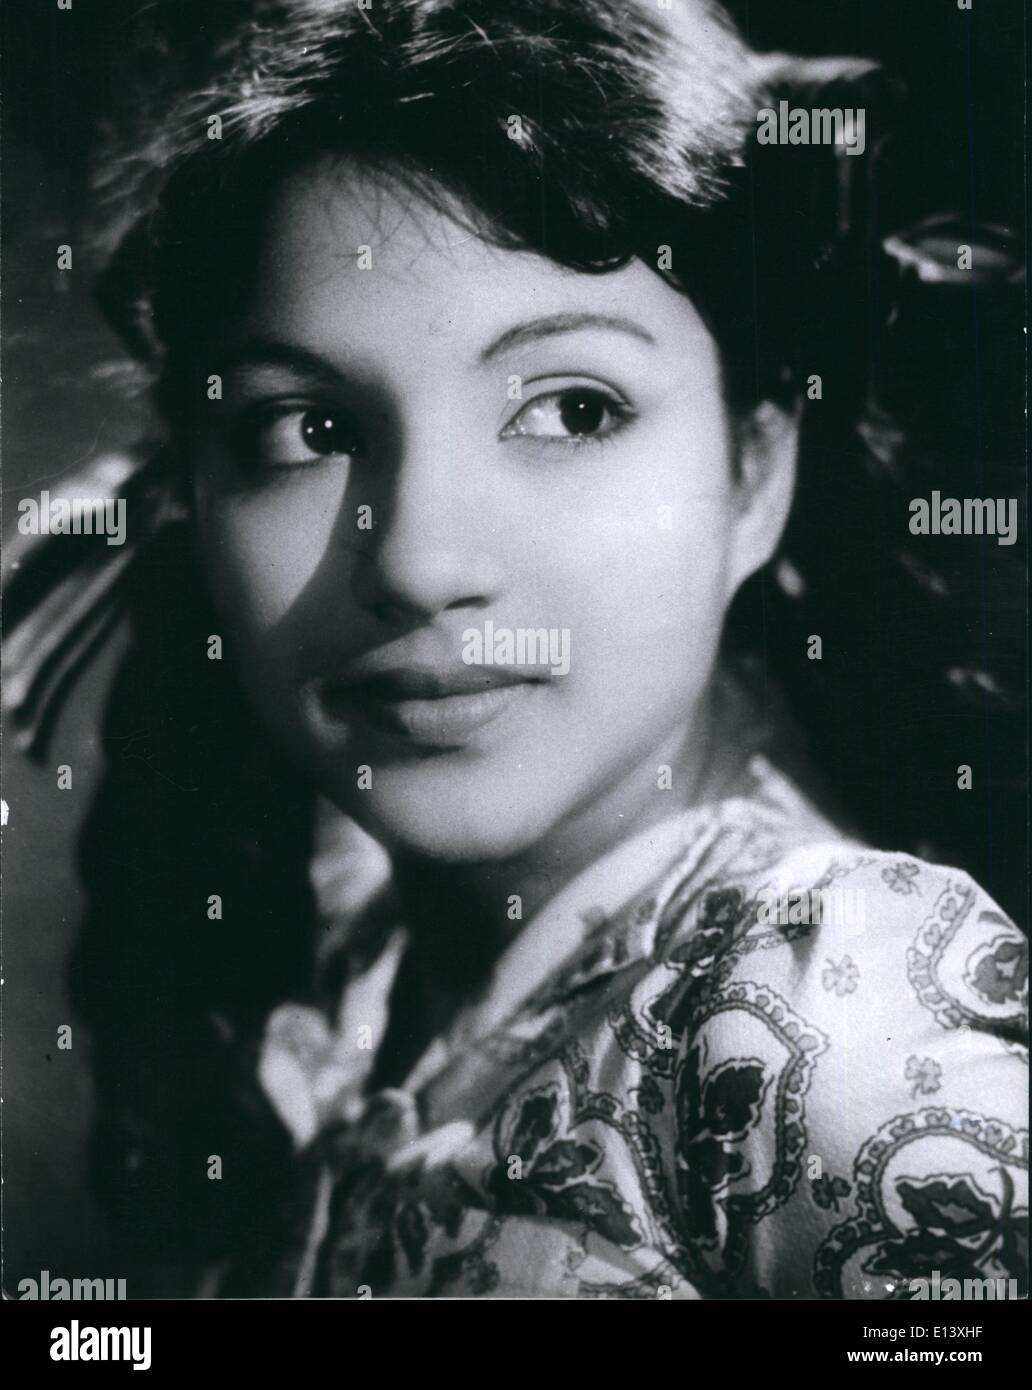 Mar. 27, 2012 - Stars Of India: Baby Naaz, the idol of millions of Indian film-goers was born in Bambay in 1944. Her parents come from Lucknow. She has starred in 60 pictures. She started her career in 1951 as a juvenile artists. She won a citation award at the International Film Festival at Cannes in 1954 for her acting in the film ''Boot Polish''. Indian children are her biggest fans. Stock Photo